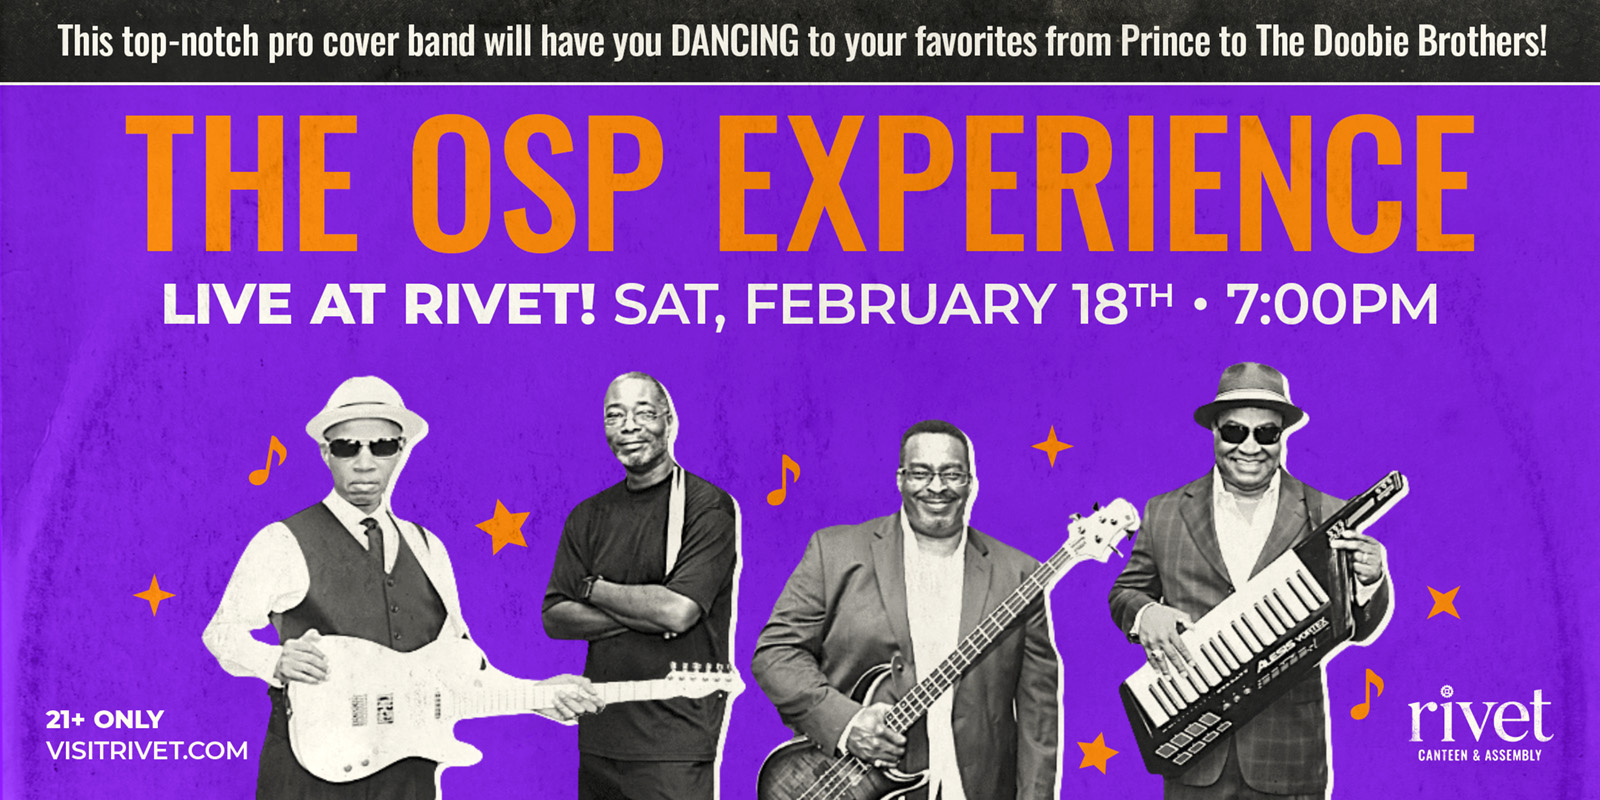 Back again by popular demand! The OSP Experience will be performing live at Rivet: Canteen & Assembly on Saturday, February 18th, 2023!